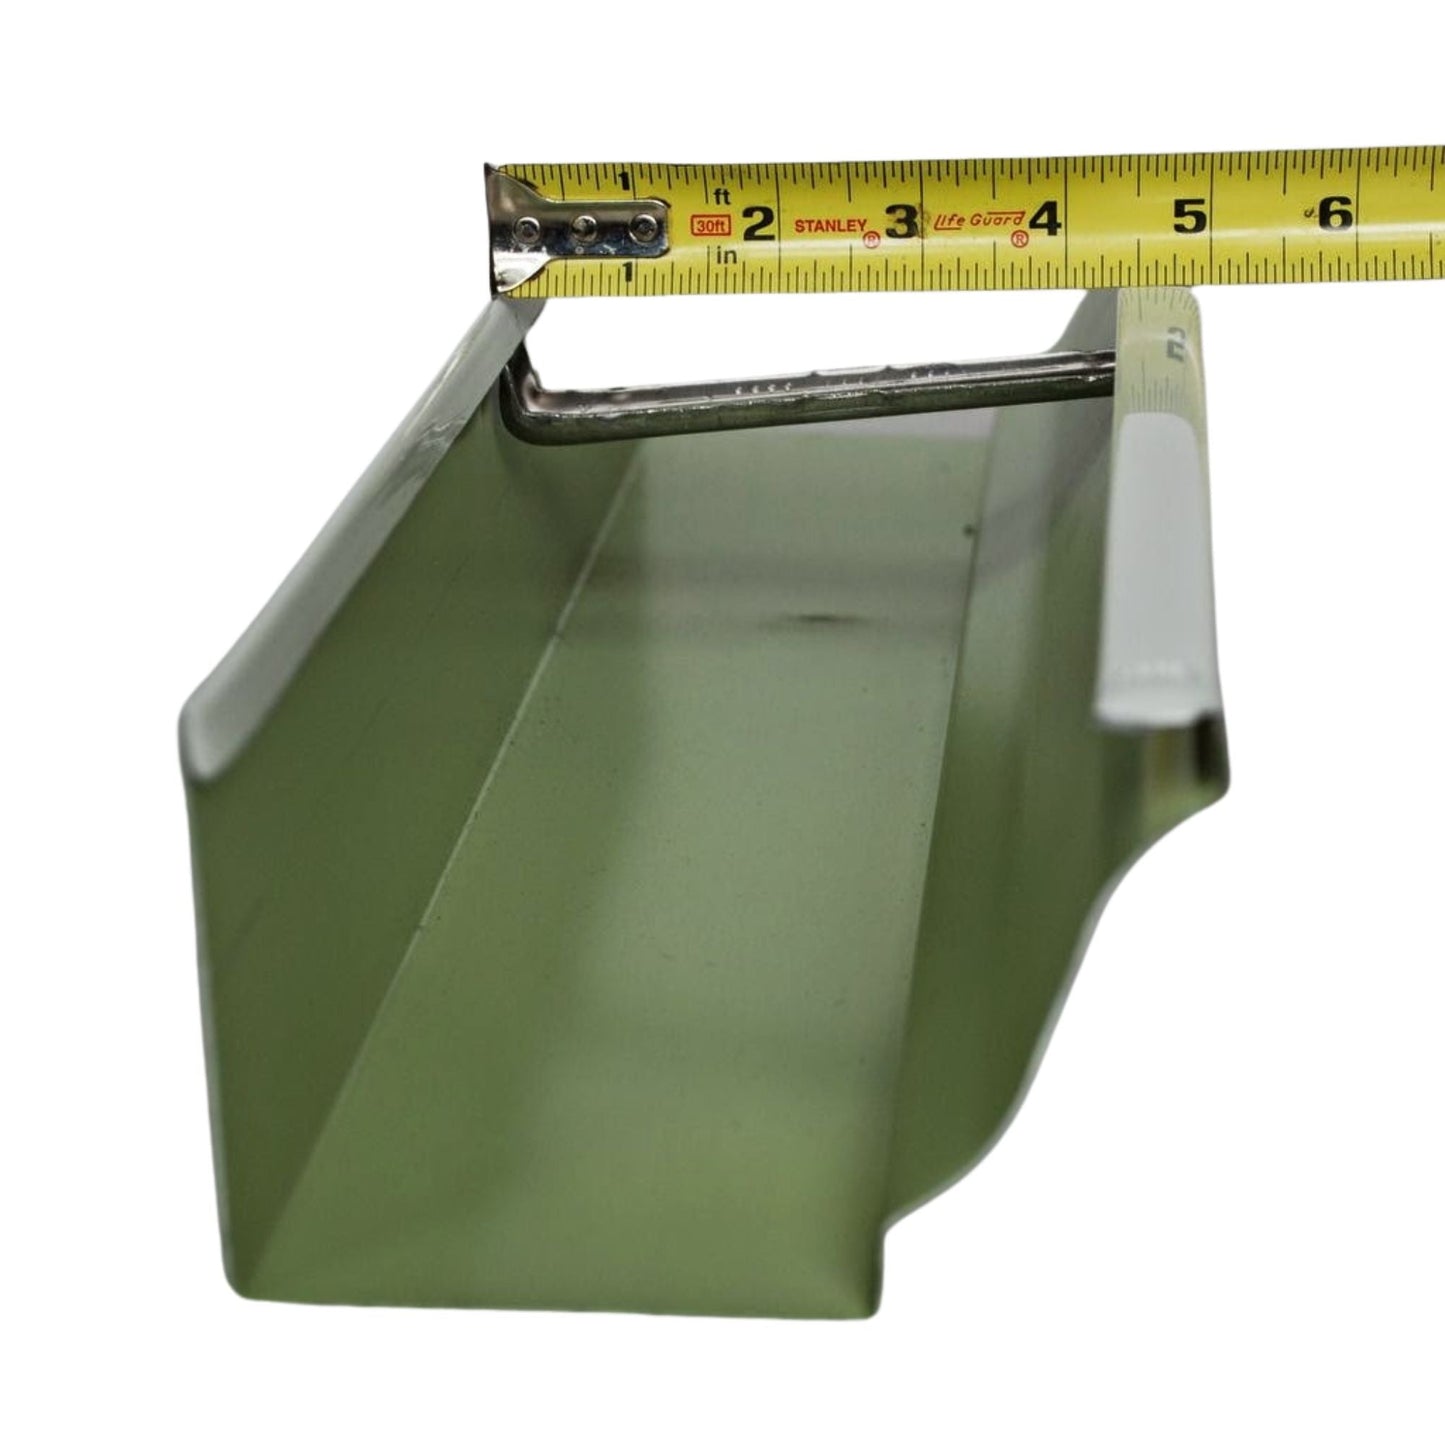 Standard 5 Inch Gutter Guards - Most Common Gutter Size